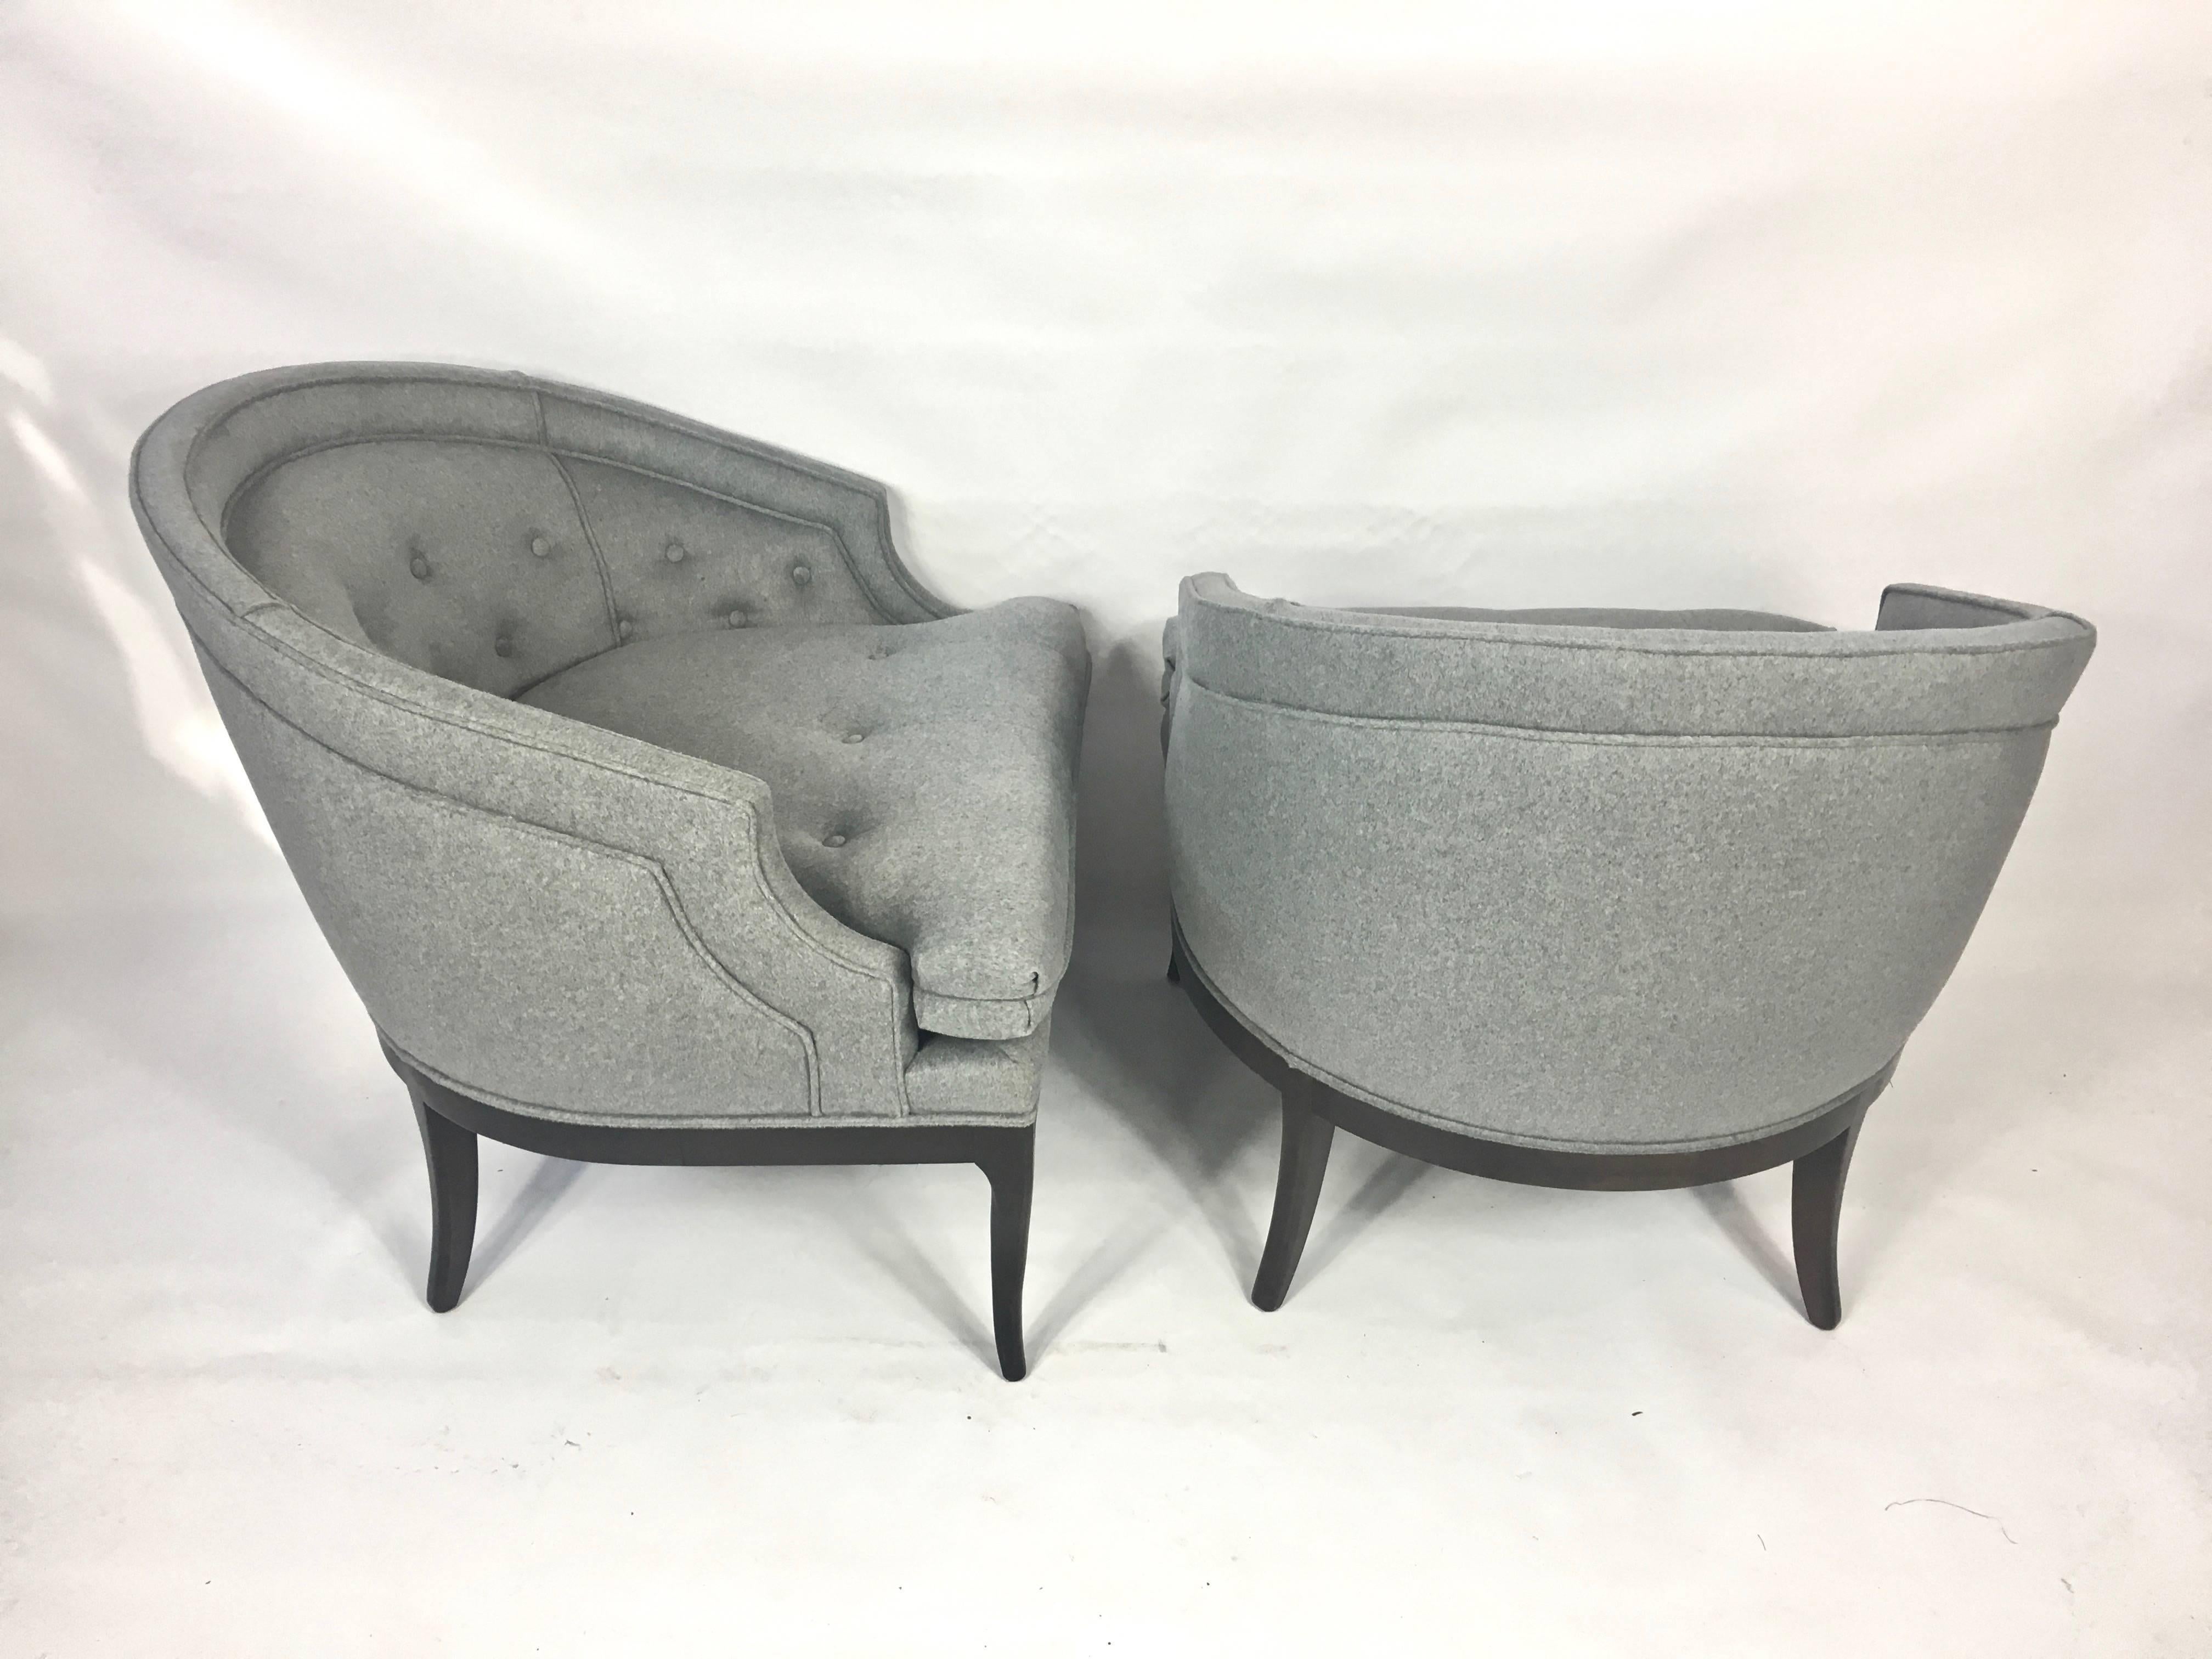 20th Century Pair of Labelled Widdicomb Lounge Chairs by T.H. Robsjohn-Gibbings